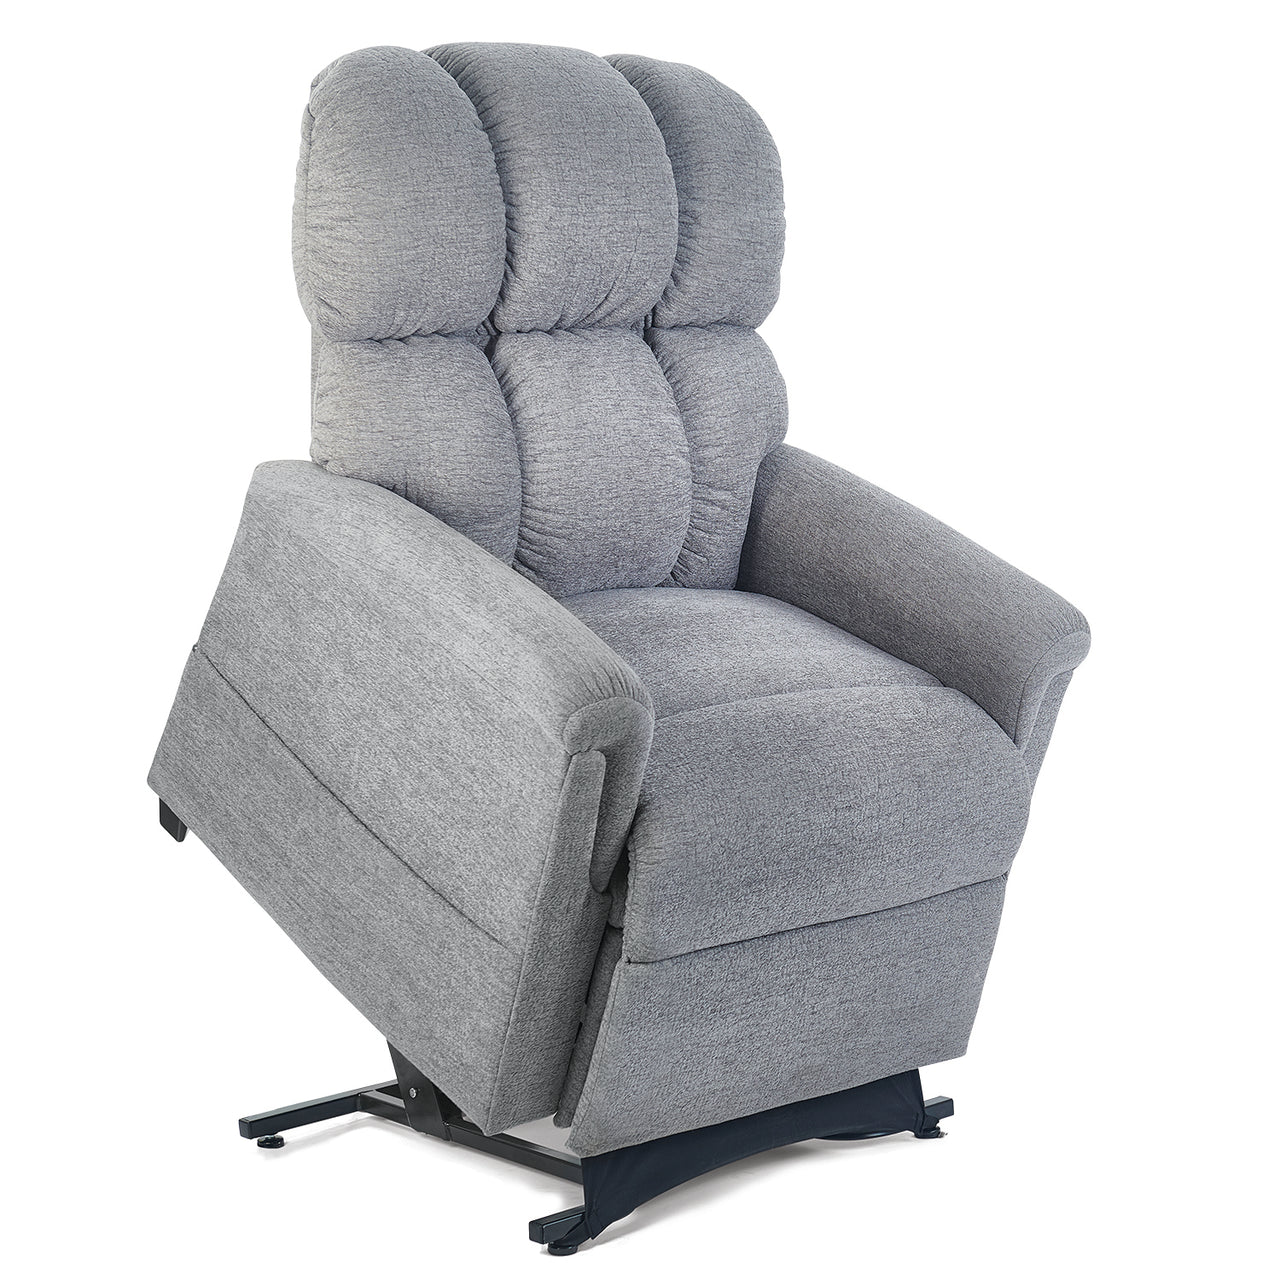 Lift Chair Recliner - Extra Wide - Rental